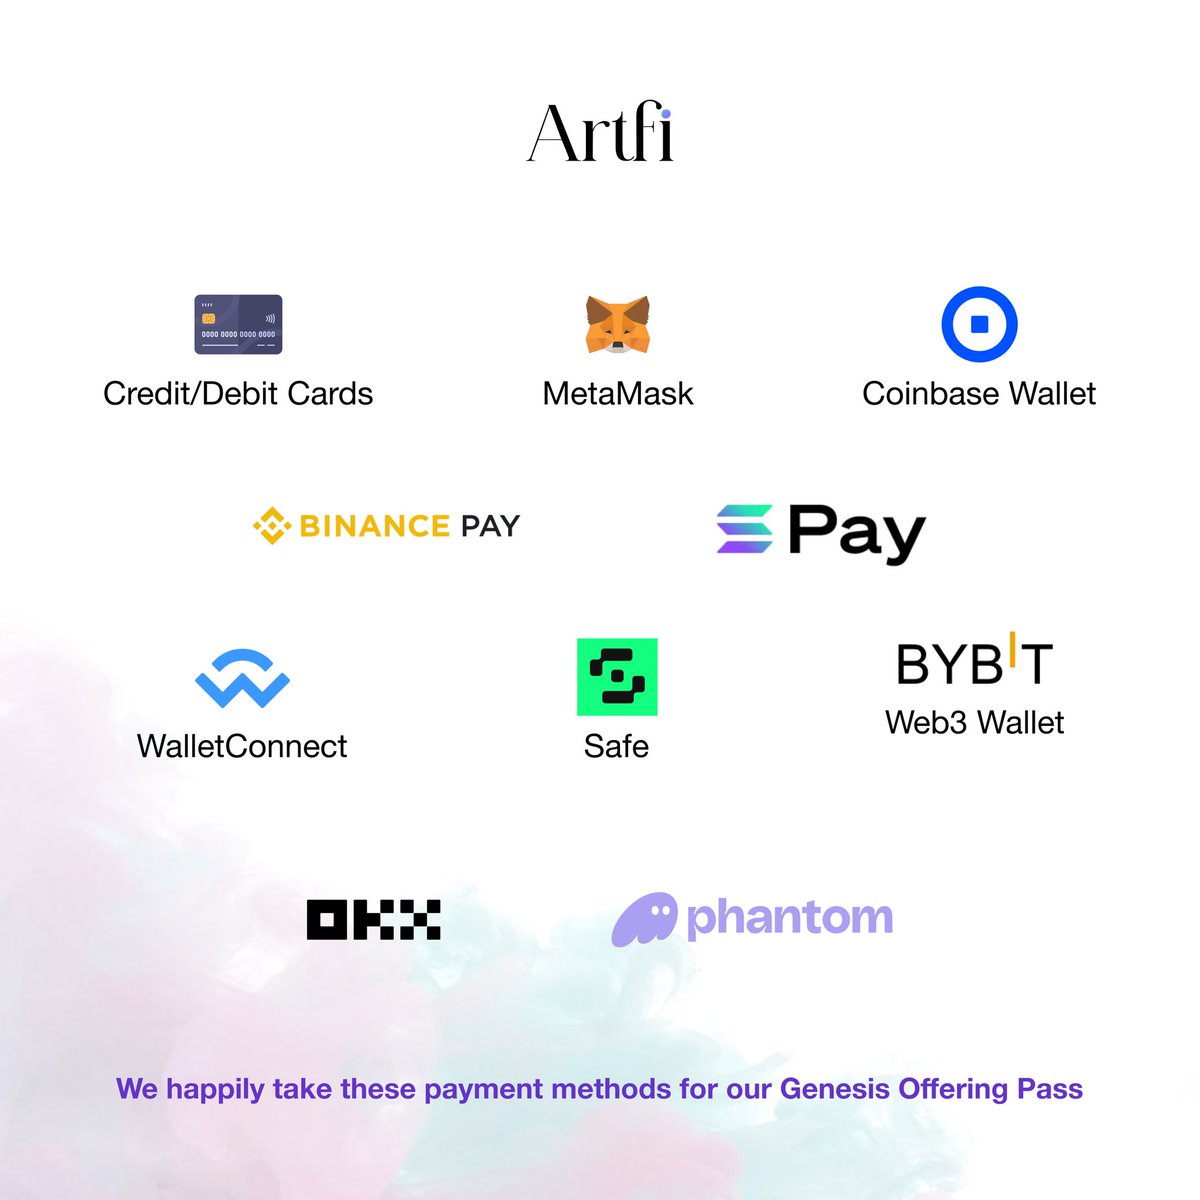 Great news! We're making art investment easier by letting you pay your way. You can use your preferred payment method. We accept both fiat and crypto! Take a look at our supported wallets and payment options. #CryptoPayments #FiatFriendly 🚀💳